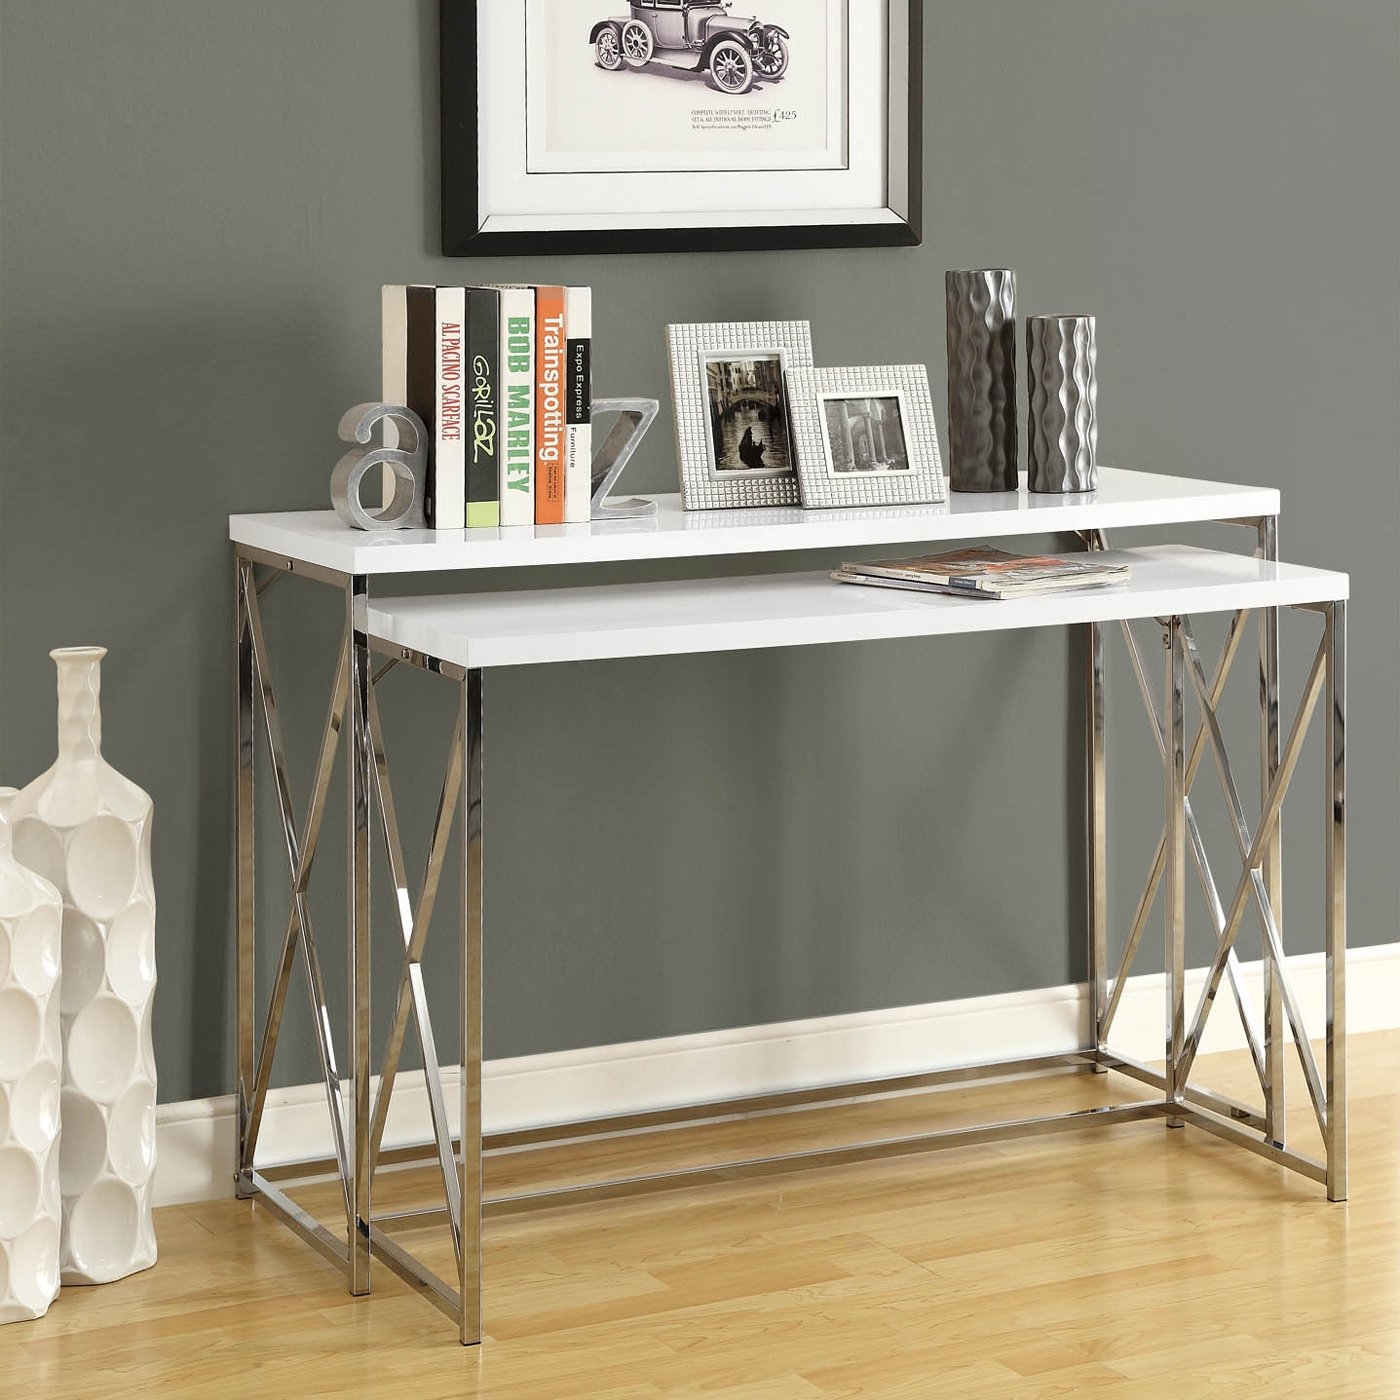 hall console table white cjlion info monarch specialties nesting set with accent inch metal dining room chairs coffee arrangements extra long shower curtain target teak garden